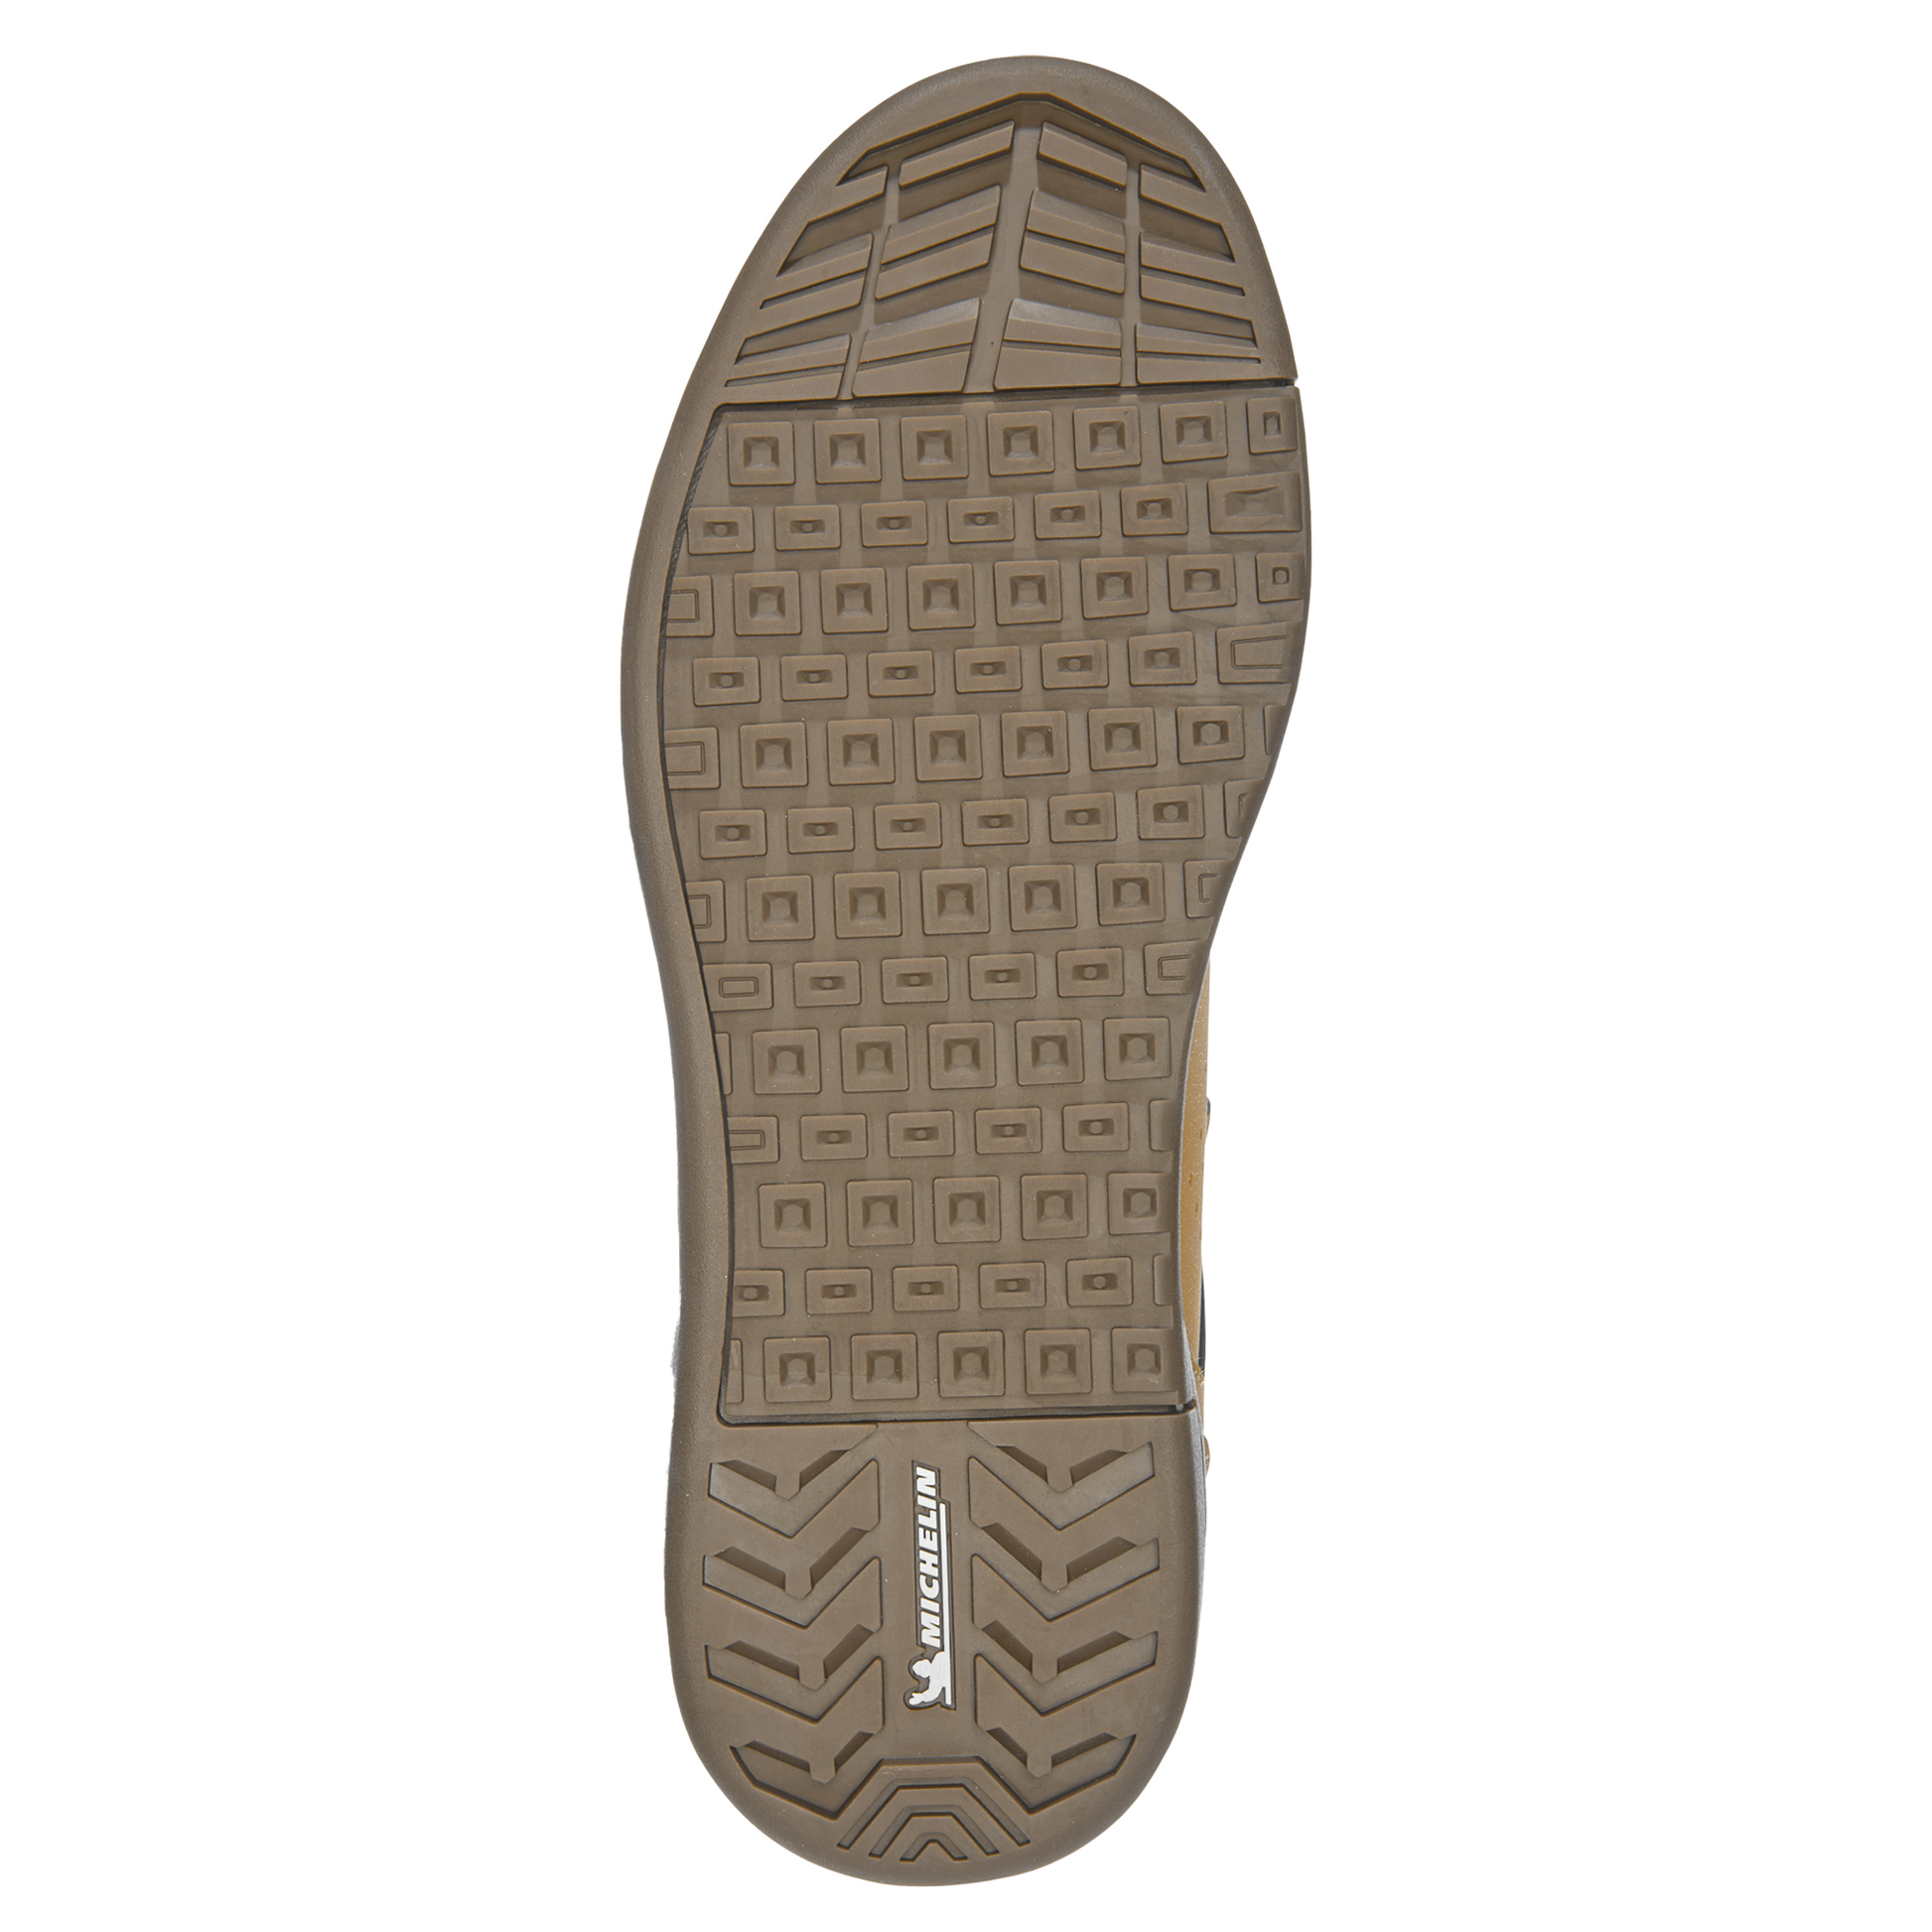 Etnies Camber Mid Michelin x TFTF Flat Shoes - US 11.0 - Tan - Gum - Image 4